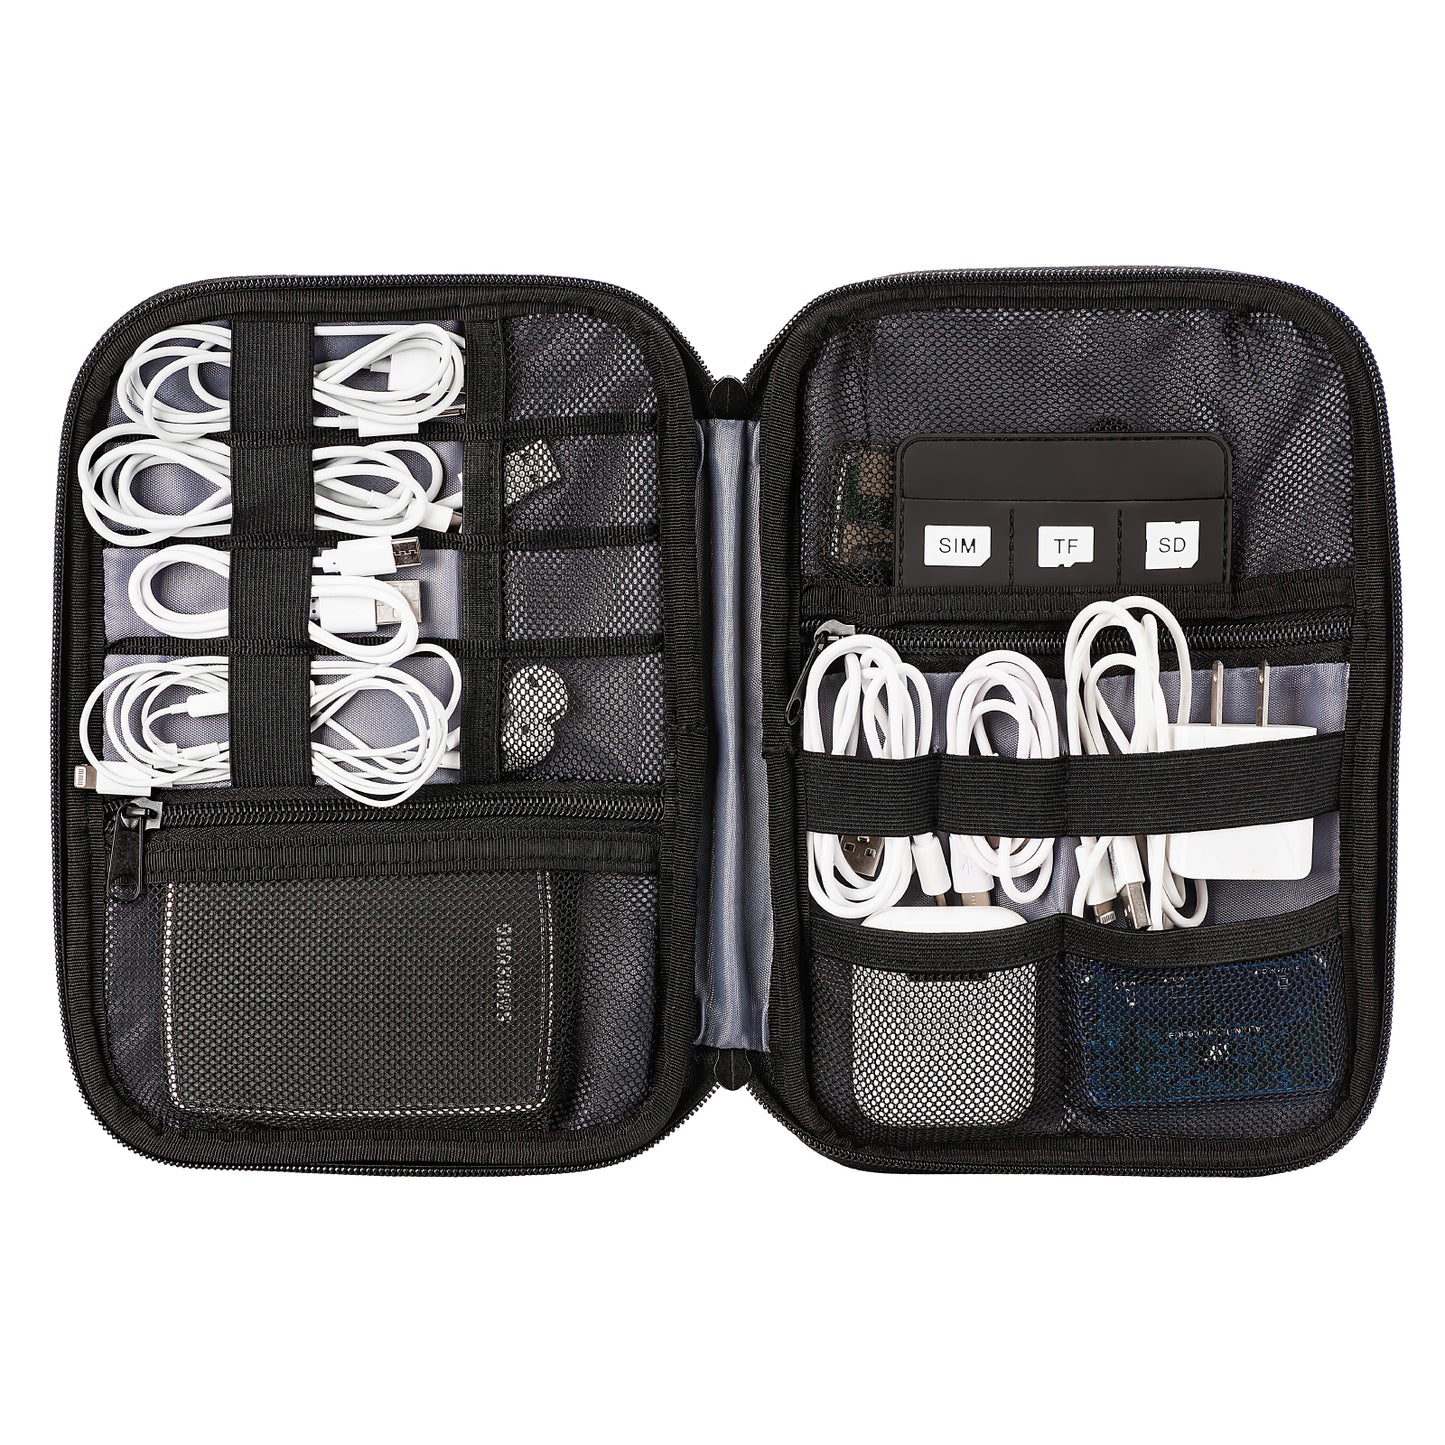 Alameda Electronic Organizer Waterproof Compact Travel Cable Organizer Bag for Cable Storage, Hard Drives, Cord, Charger, USB, SD Card